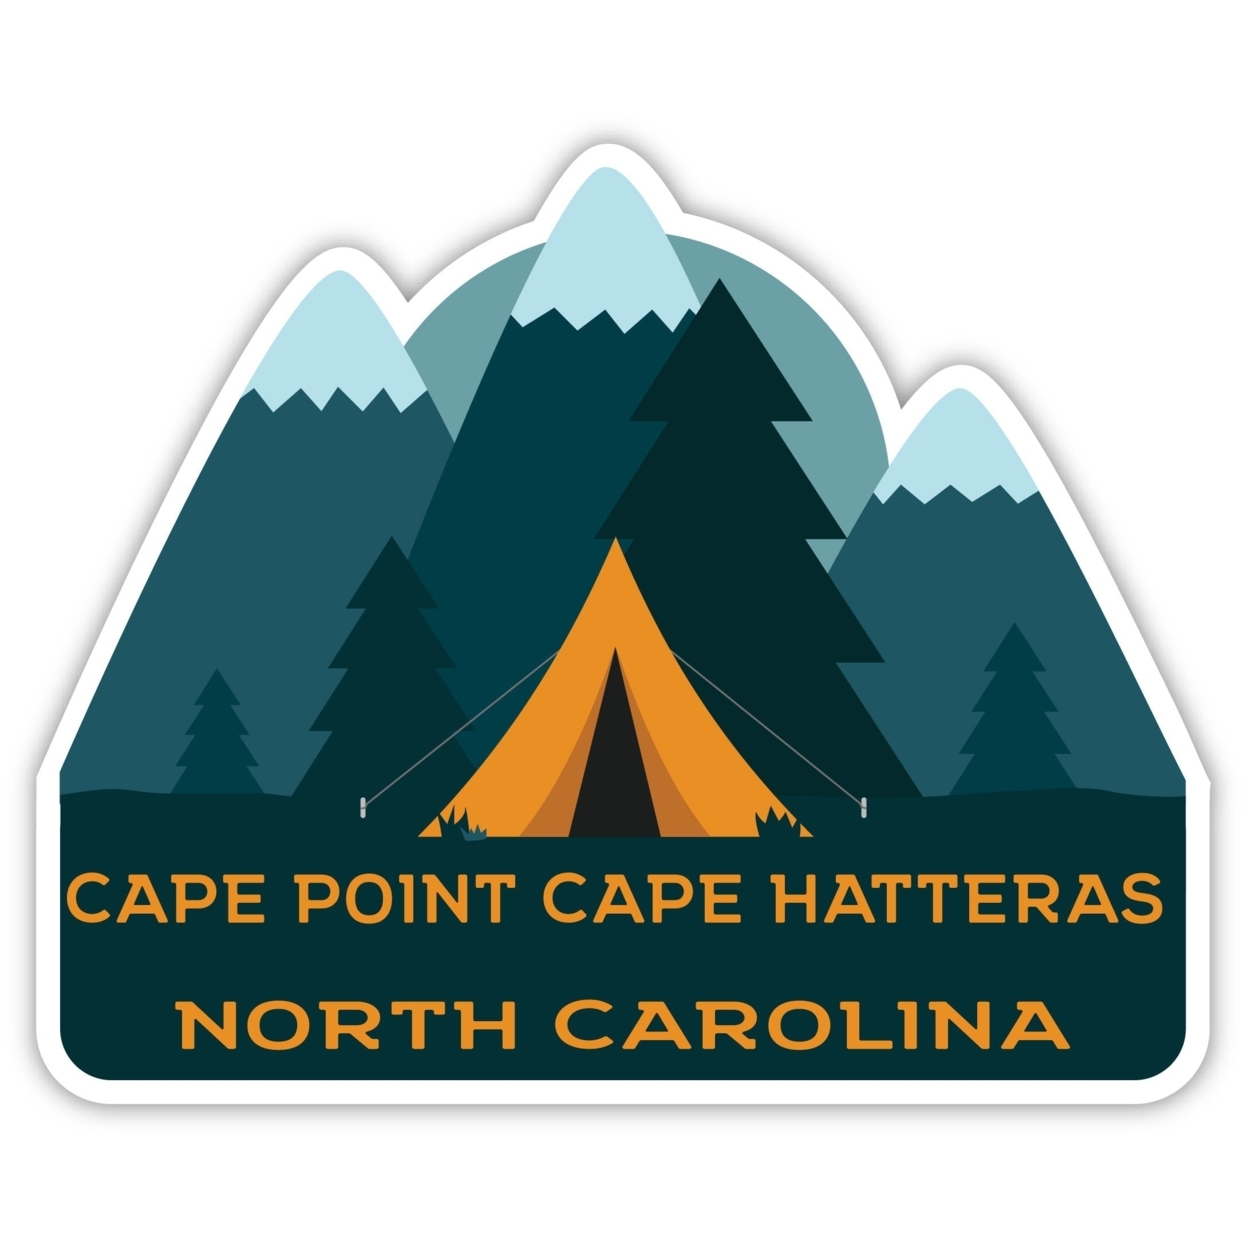 Cape Point Cape Hatteras North Carolina Souvenir Decorative Stickers (Choose Theme And Size) - 4-Pack, 6-Inch, Tent